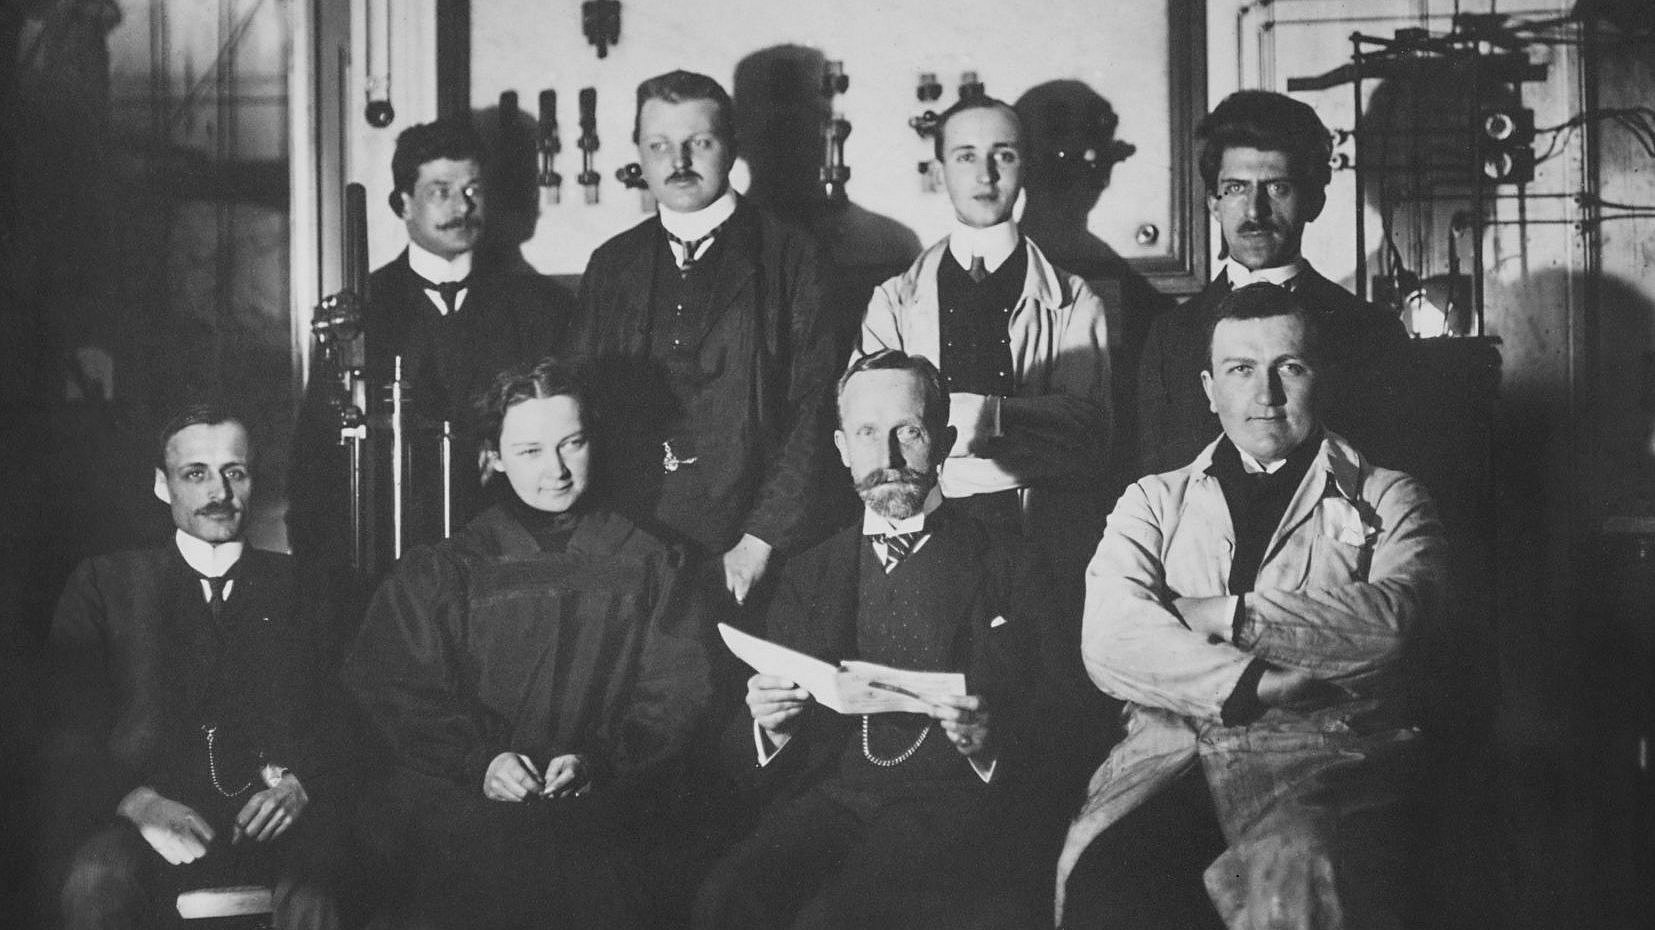 The historical picture shows Hilde Mollier surrounded by colleagues in Technical Physics (bottom row, second from left).